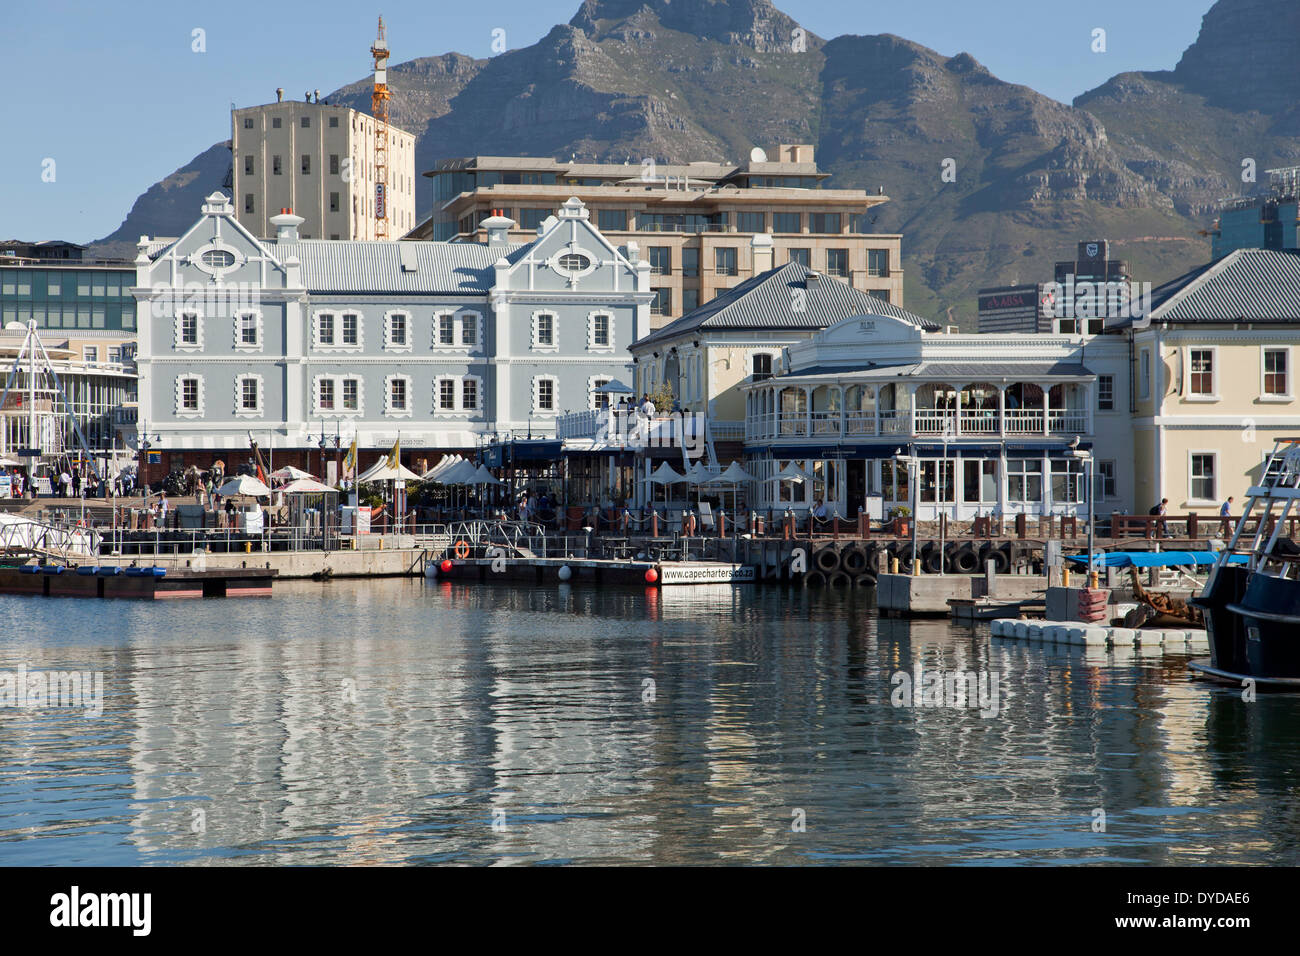 Victoria & Alfred Waterfront, Cape Town, Western Cape, South Africa Stock Photo